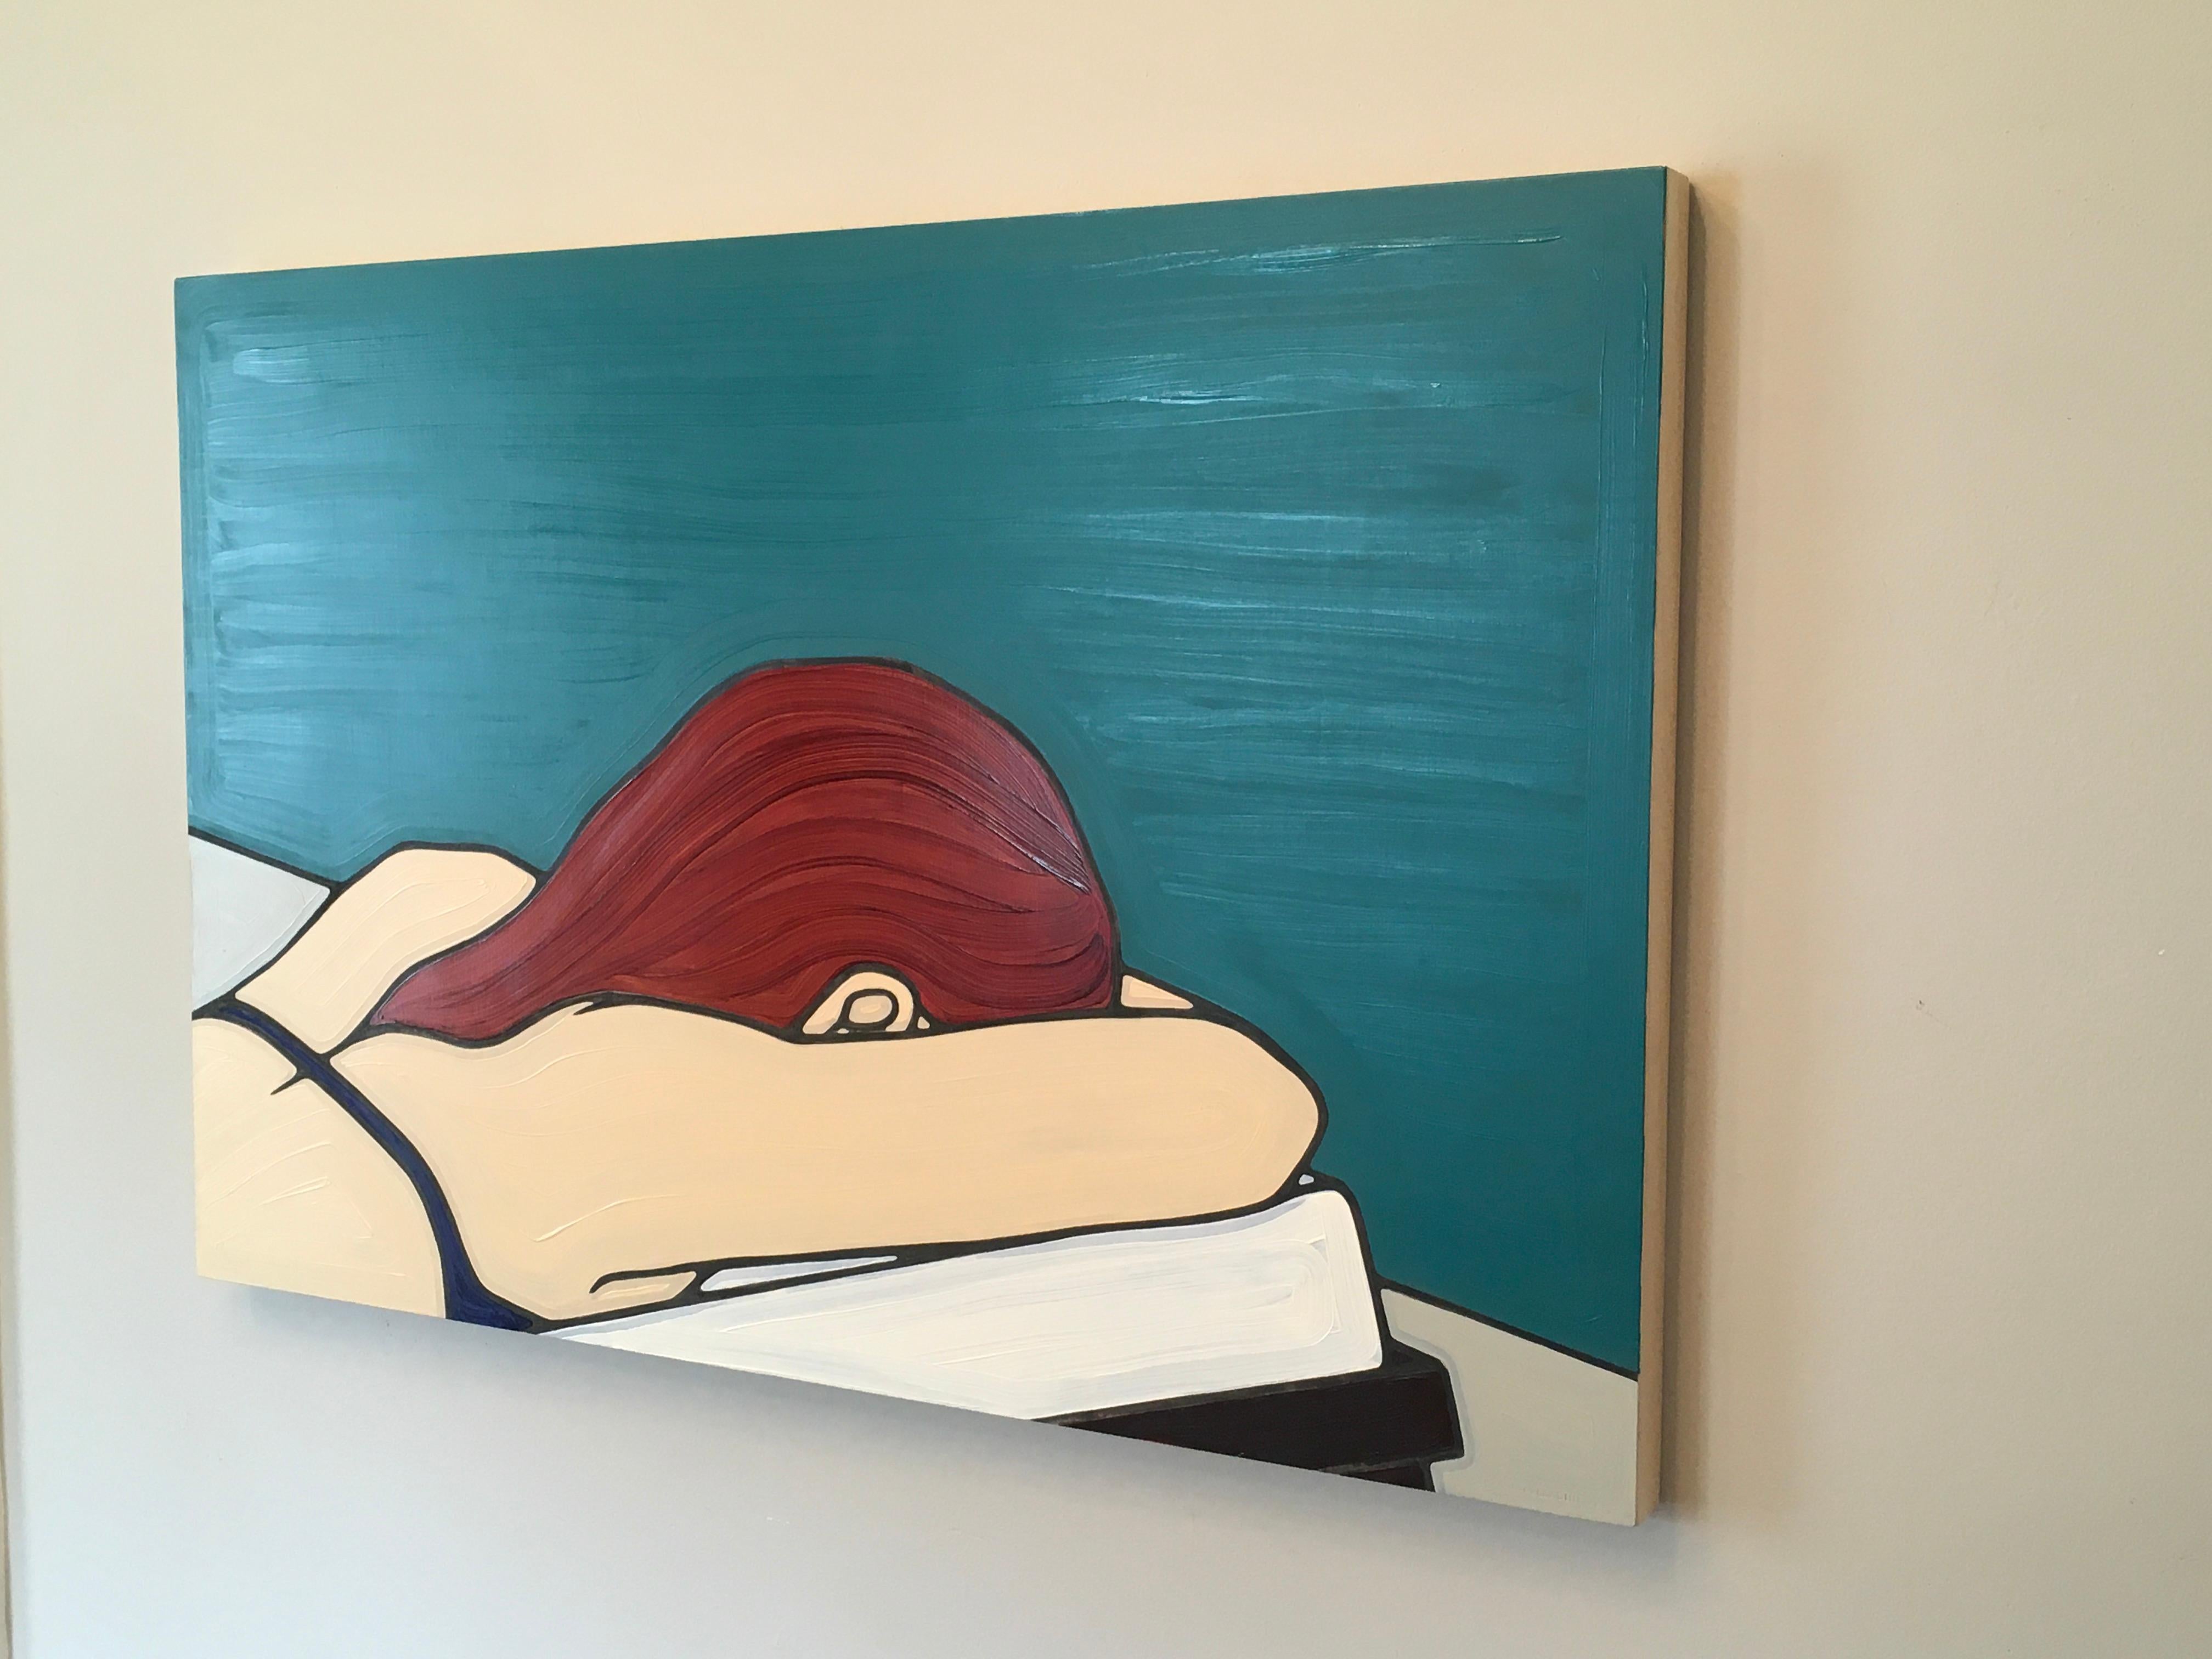 Chaise #31 by California artist Jeffrey Palladini is a minimalist figurative painting.  It is Oil and Charcoal on Wood Panel.  It is 24x36. With the wood frame, it is 25x37. It is a female figure  lying on her stomach in a lounge chair near a